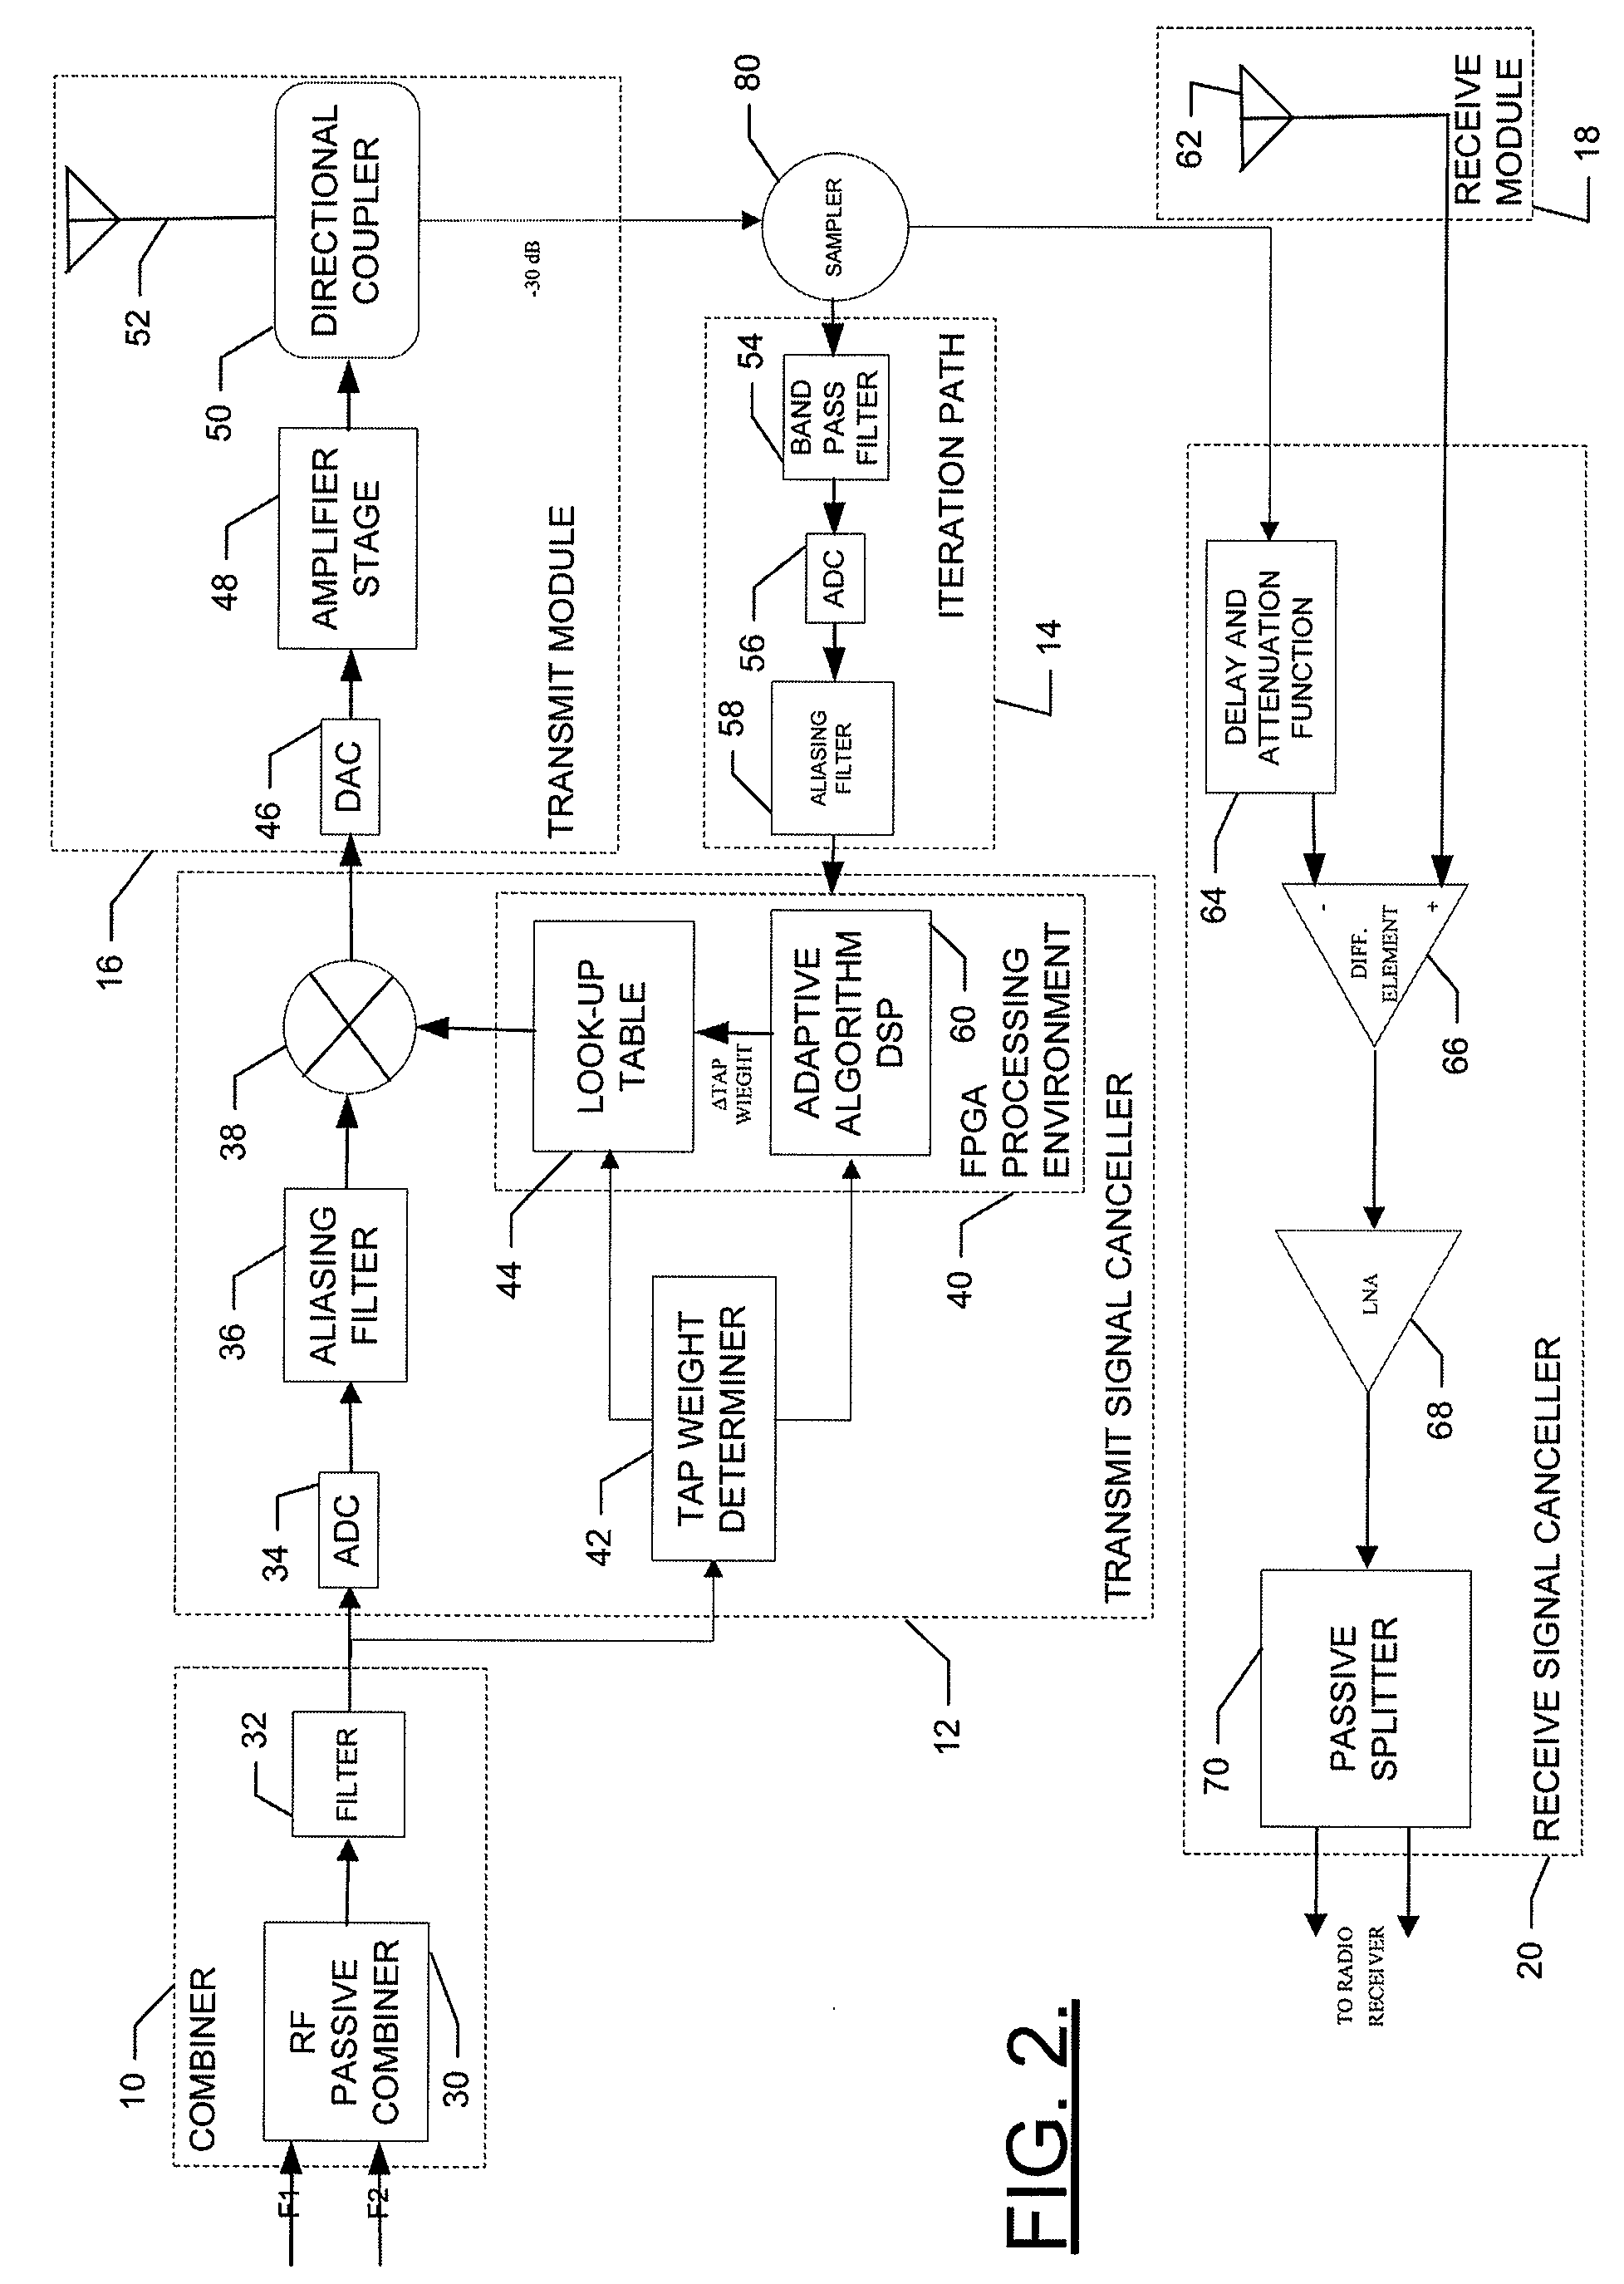 Method, apparatus and system for an omni digital package for reducing interference